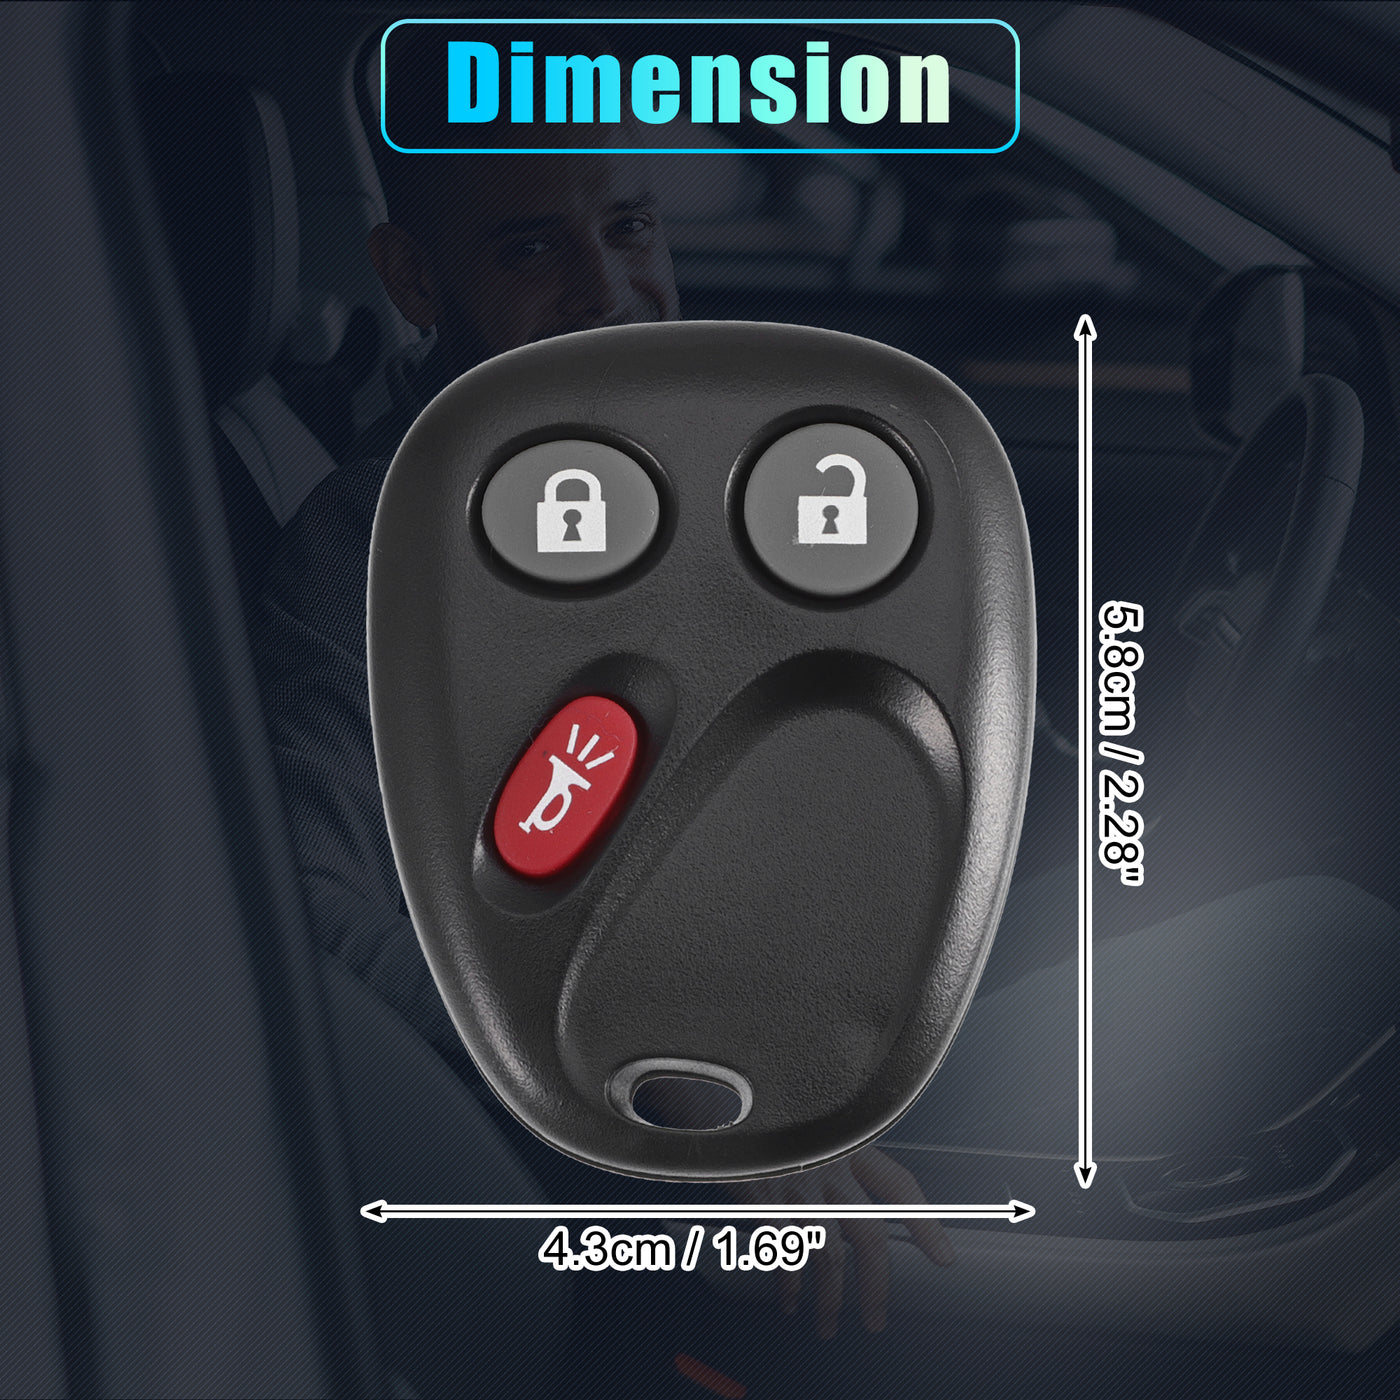 X AUTOHAUX LHJ011315MHz Keyless Entry Remote Ignition Transponder Key Fob for Chevrolet Silverado Suburban Tahoe Avalanche Escalade for GMC Sierra 2500 HD 2003-2006 3 Buttons